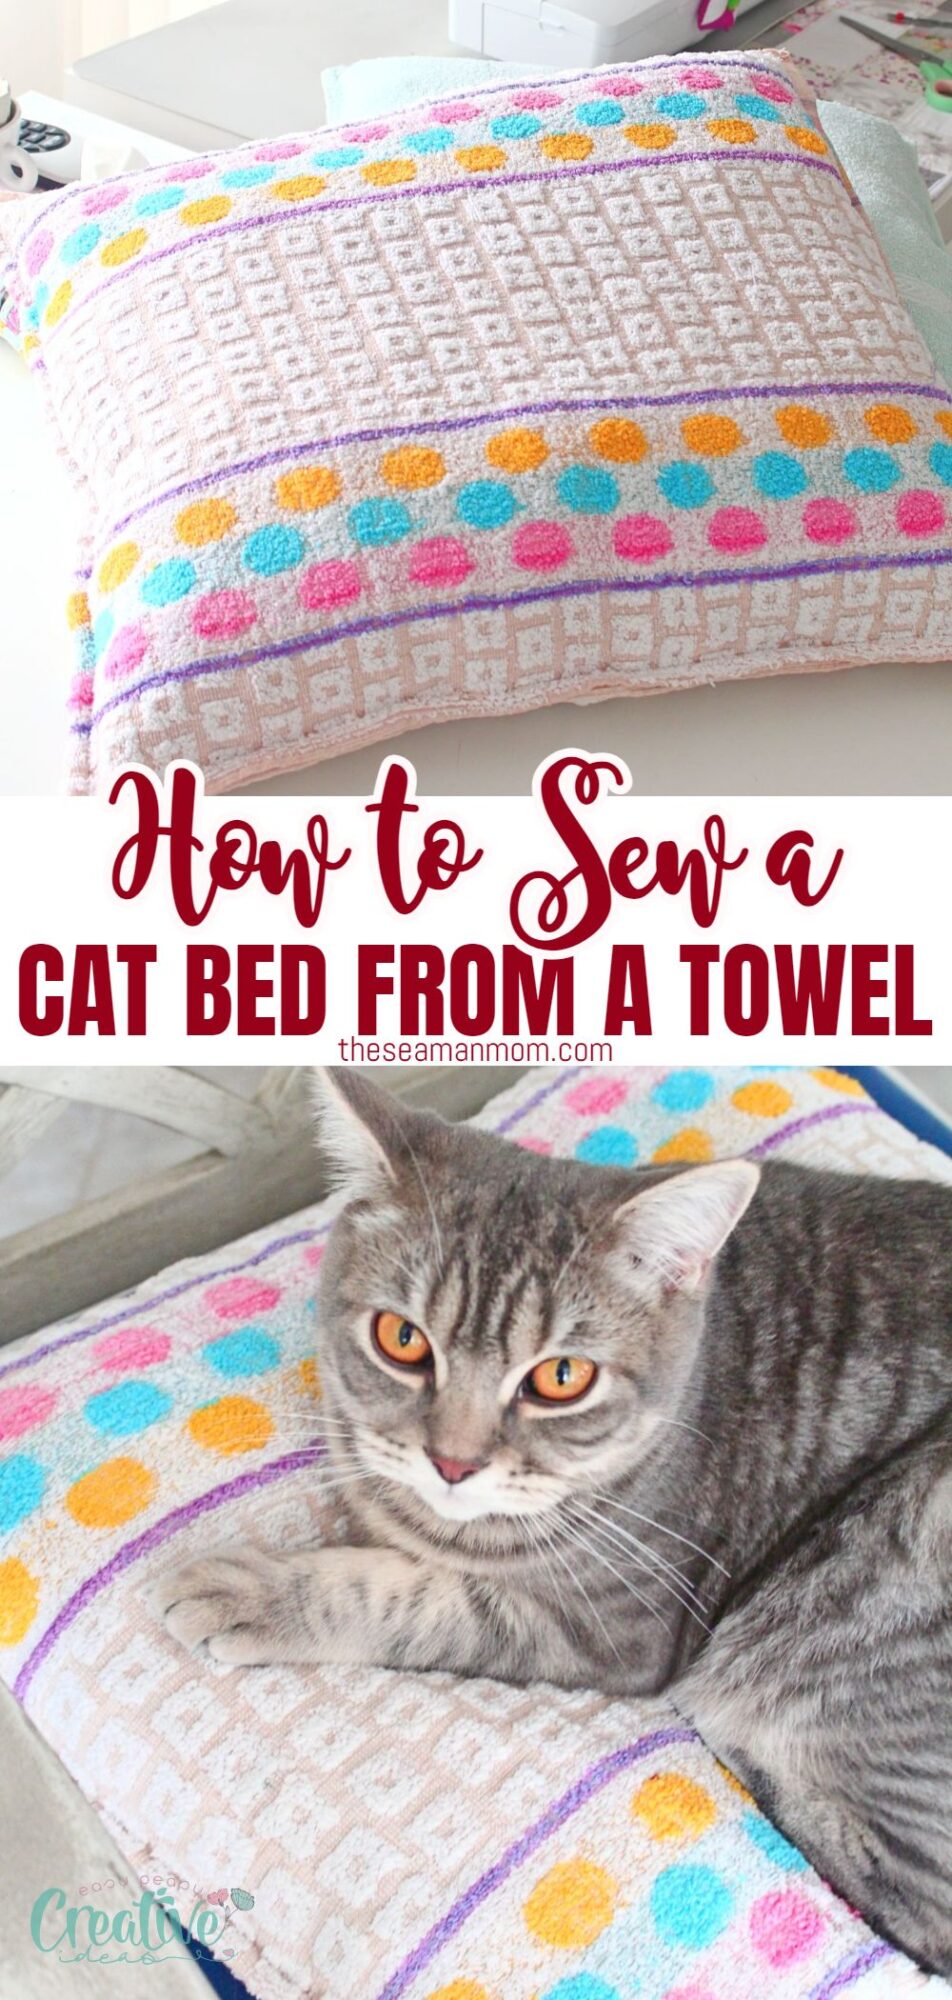 Learn how to sew a cat bed from a towel in 10 minutes! Easy DIY steps for a custom spot your cat will love.